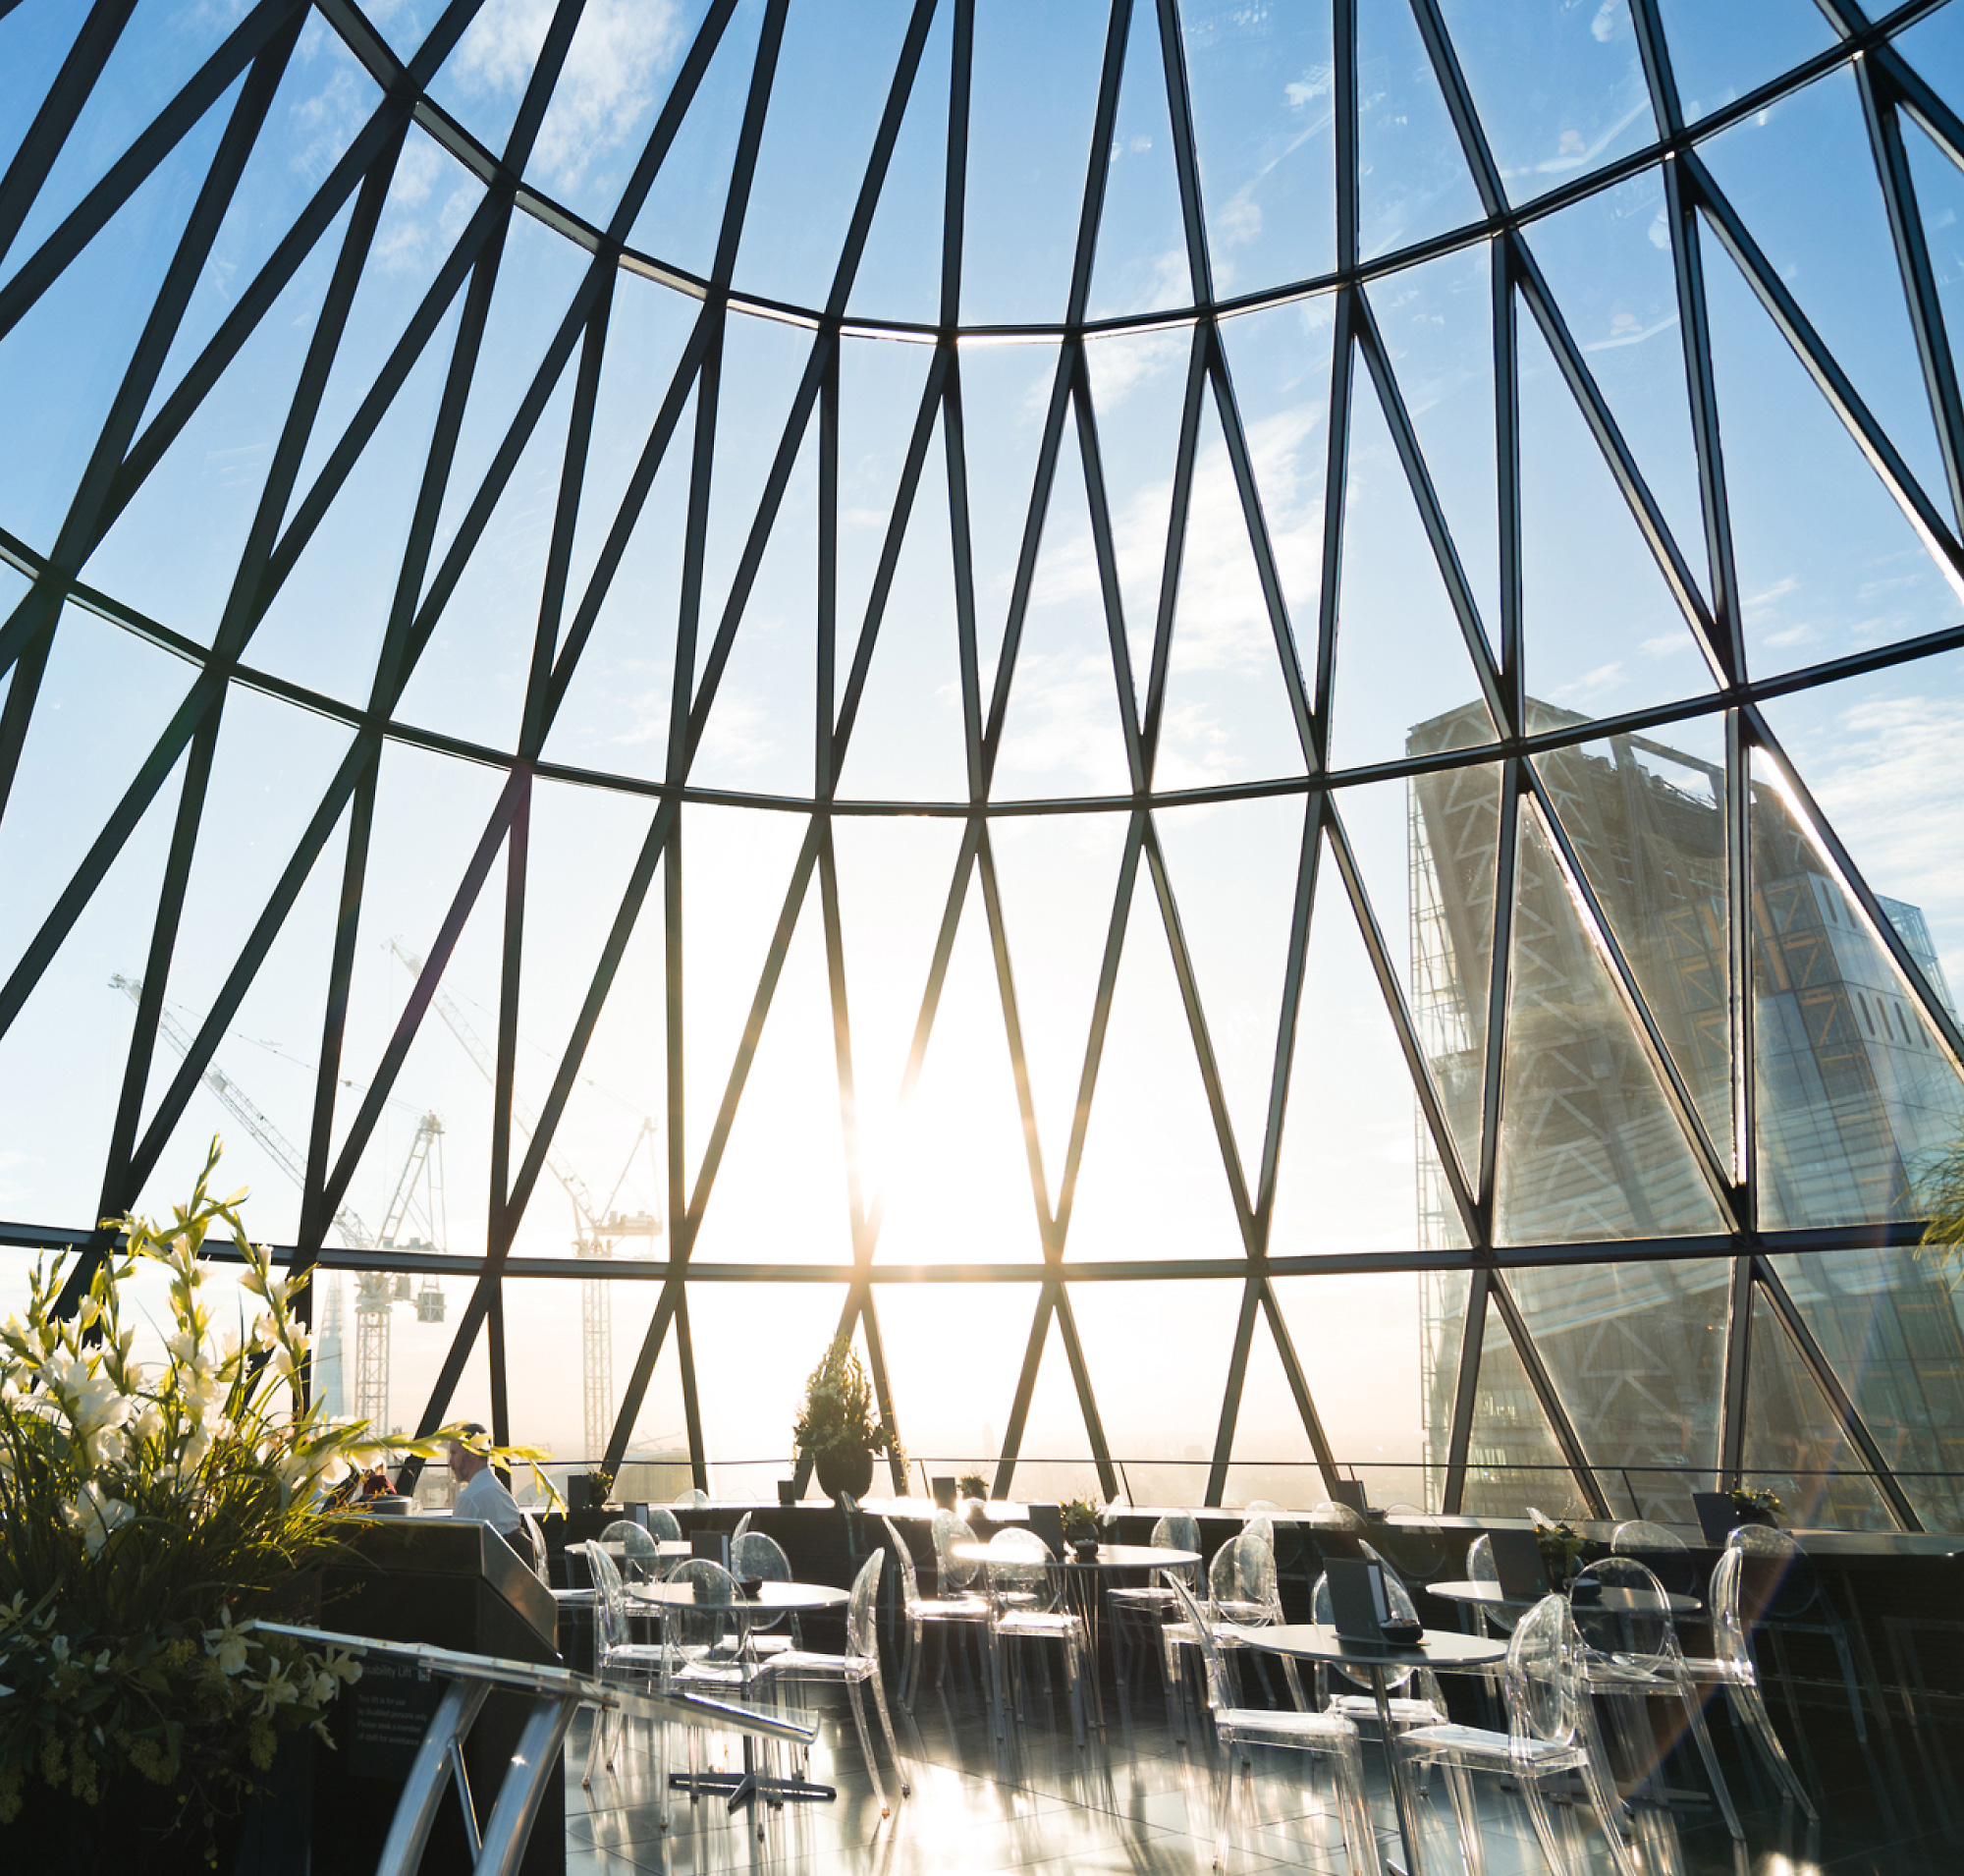 Sunlight streams through a large geometric glass dome overlooking a cityscape, illuminating an interior dining area 